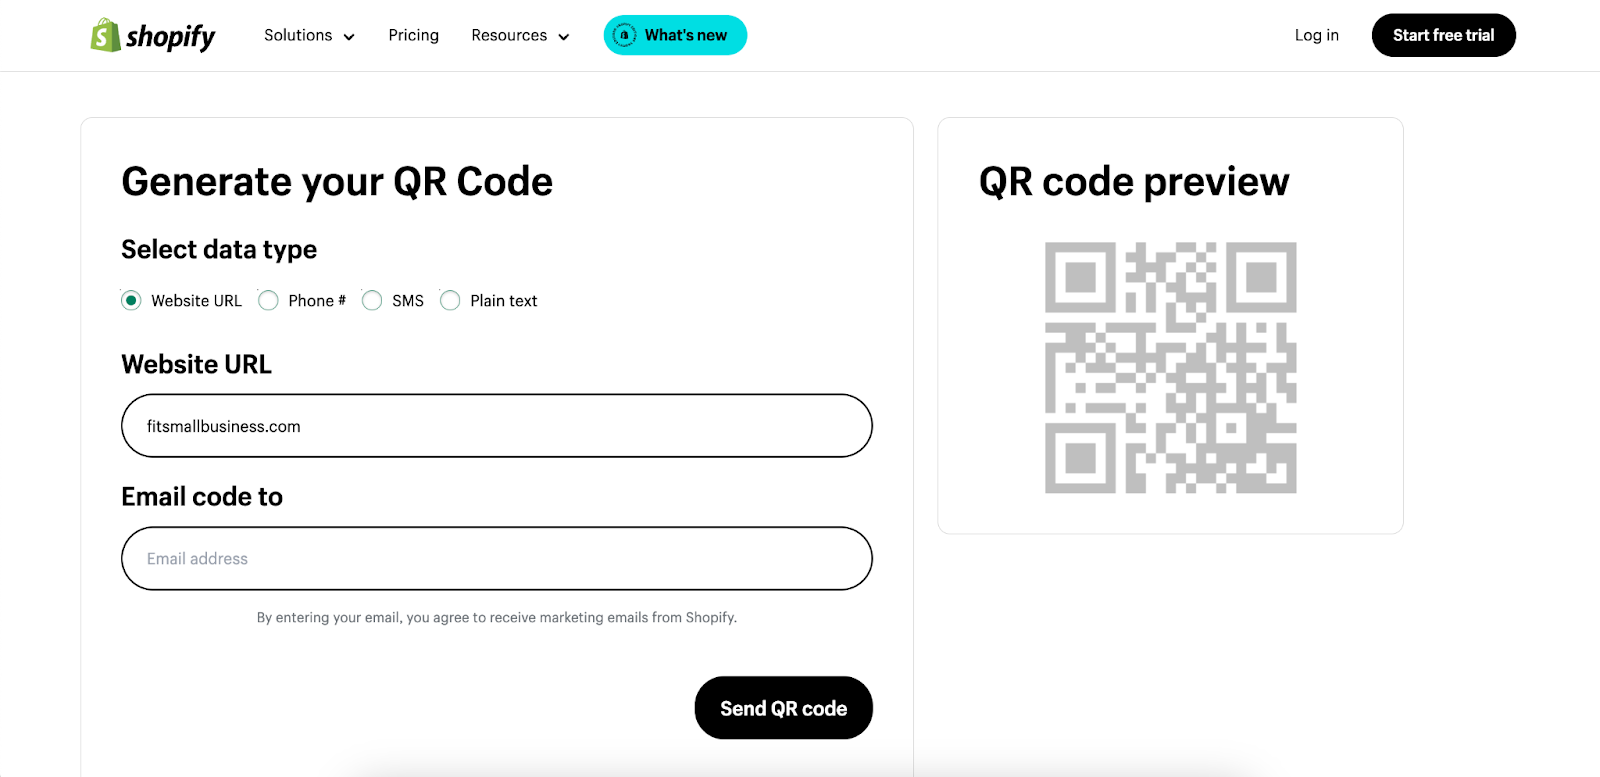 Shopify's QR code generator in action.